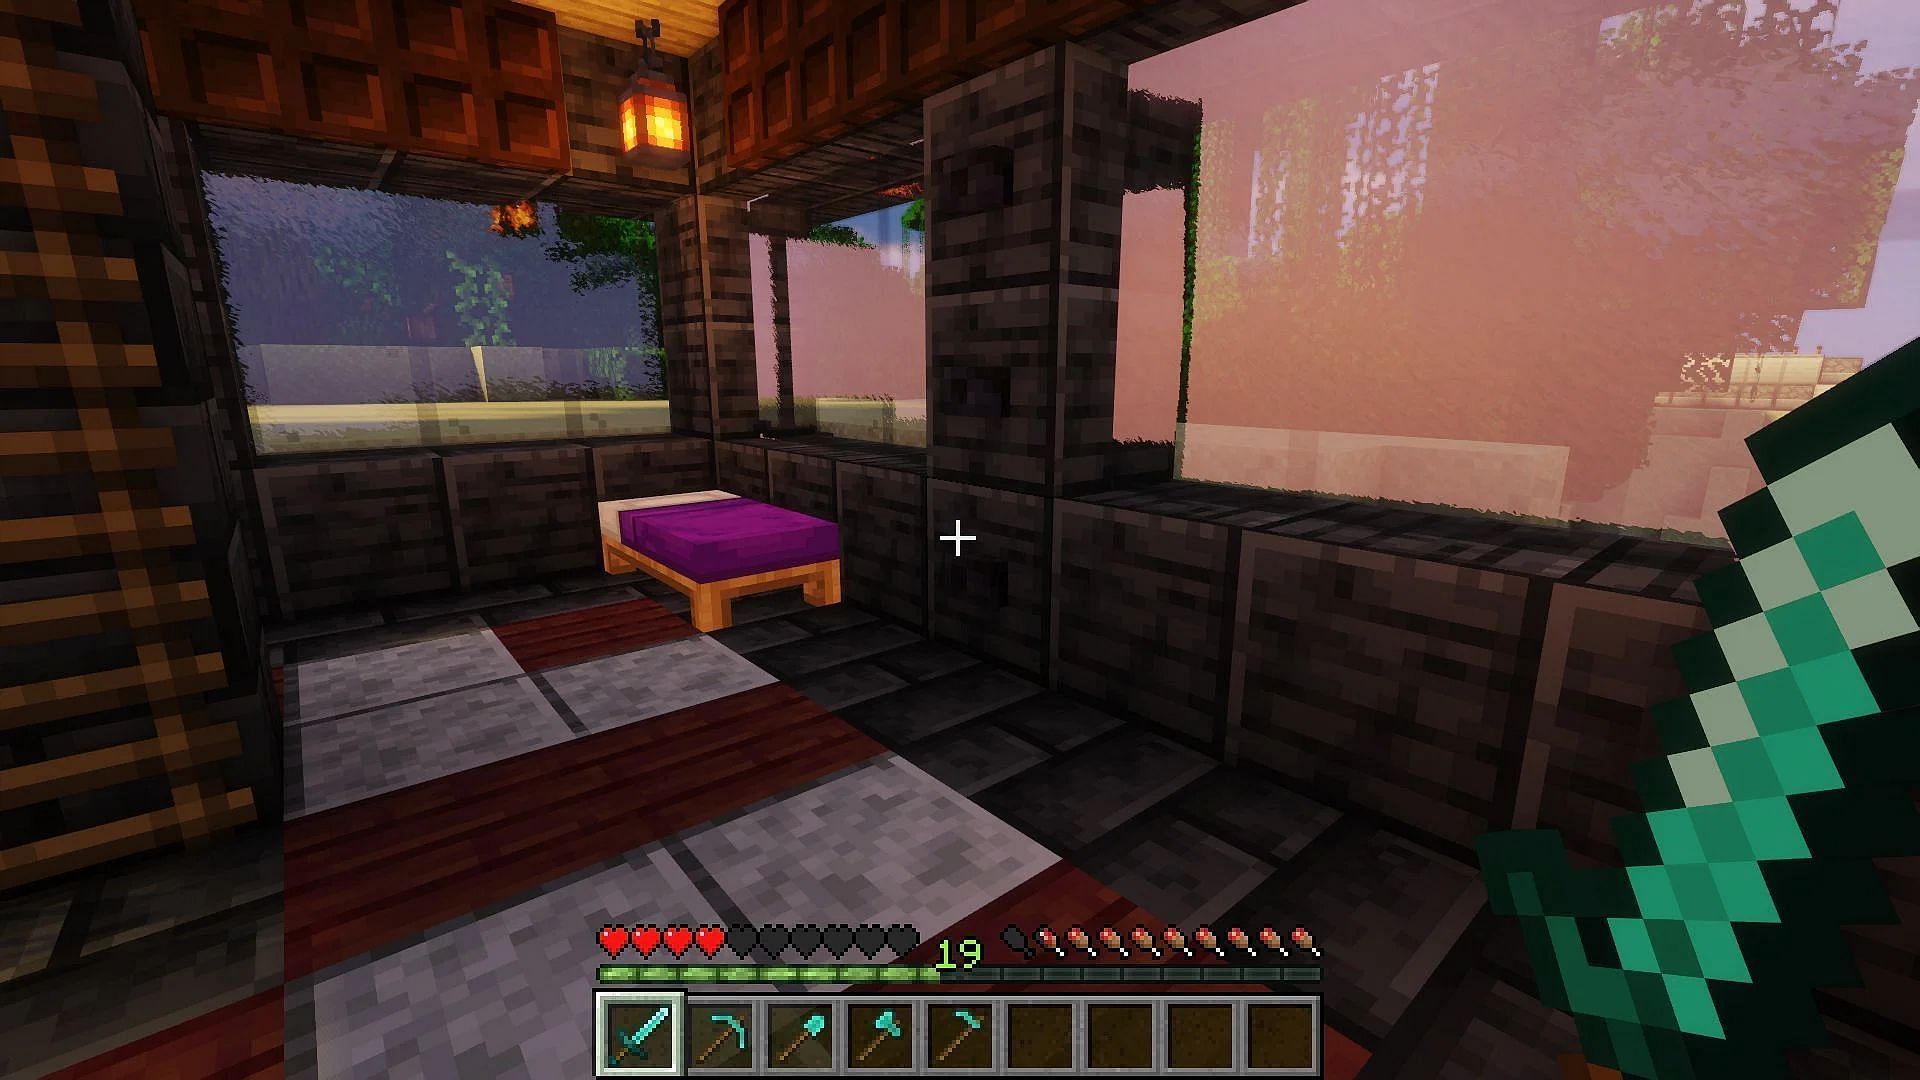 Players must keep the hotbar clean and organized for quick access to items (Image via Mojang)